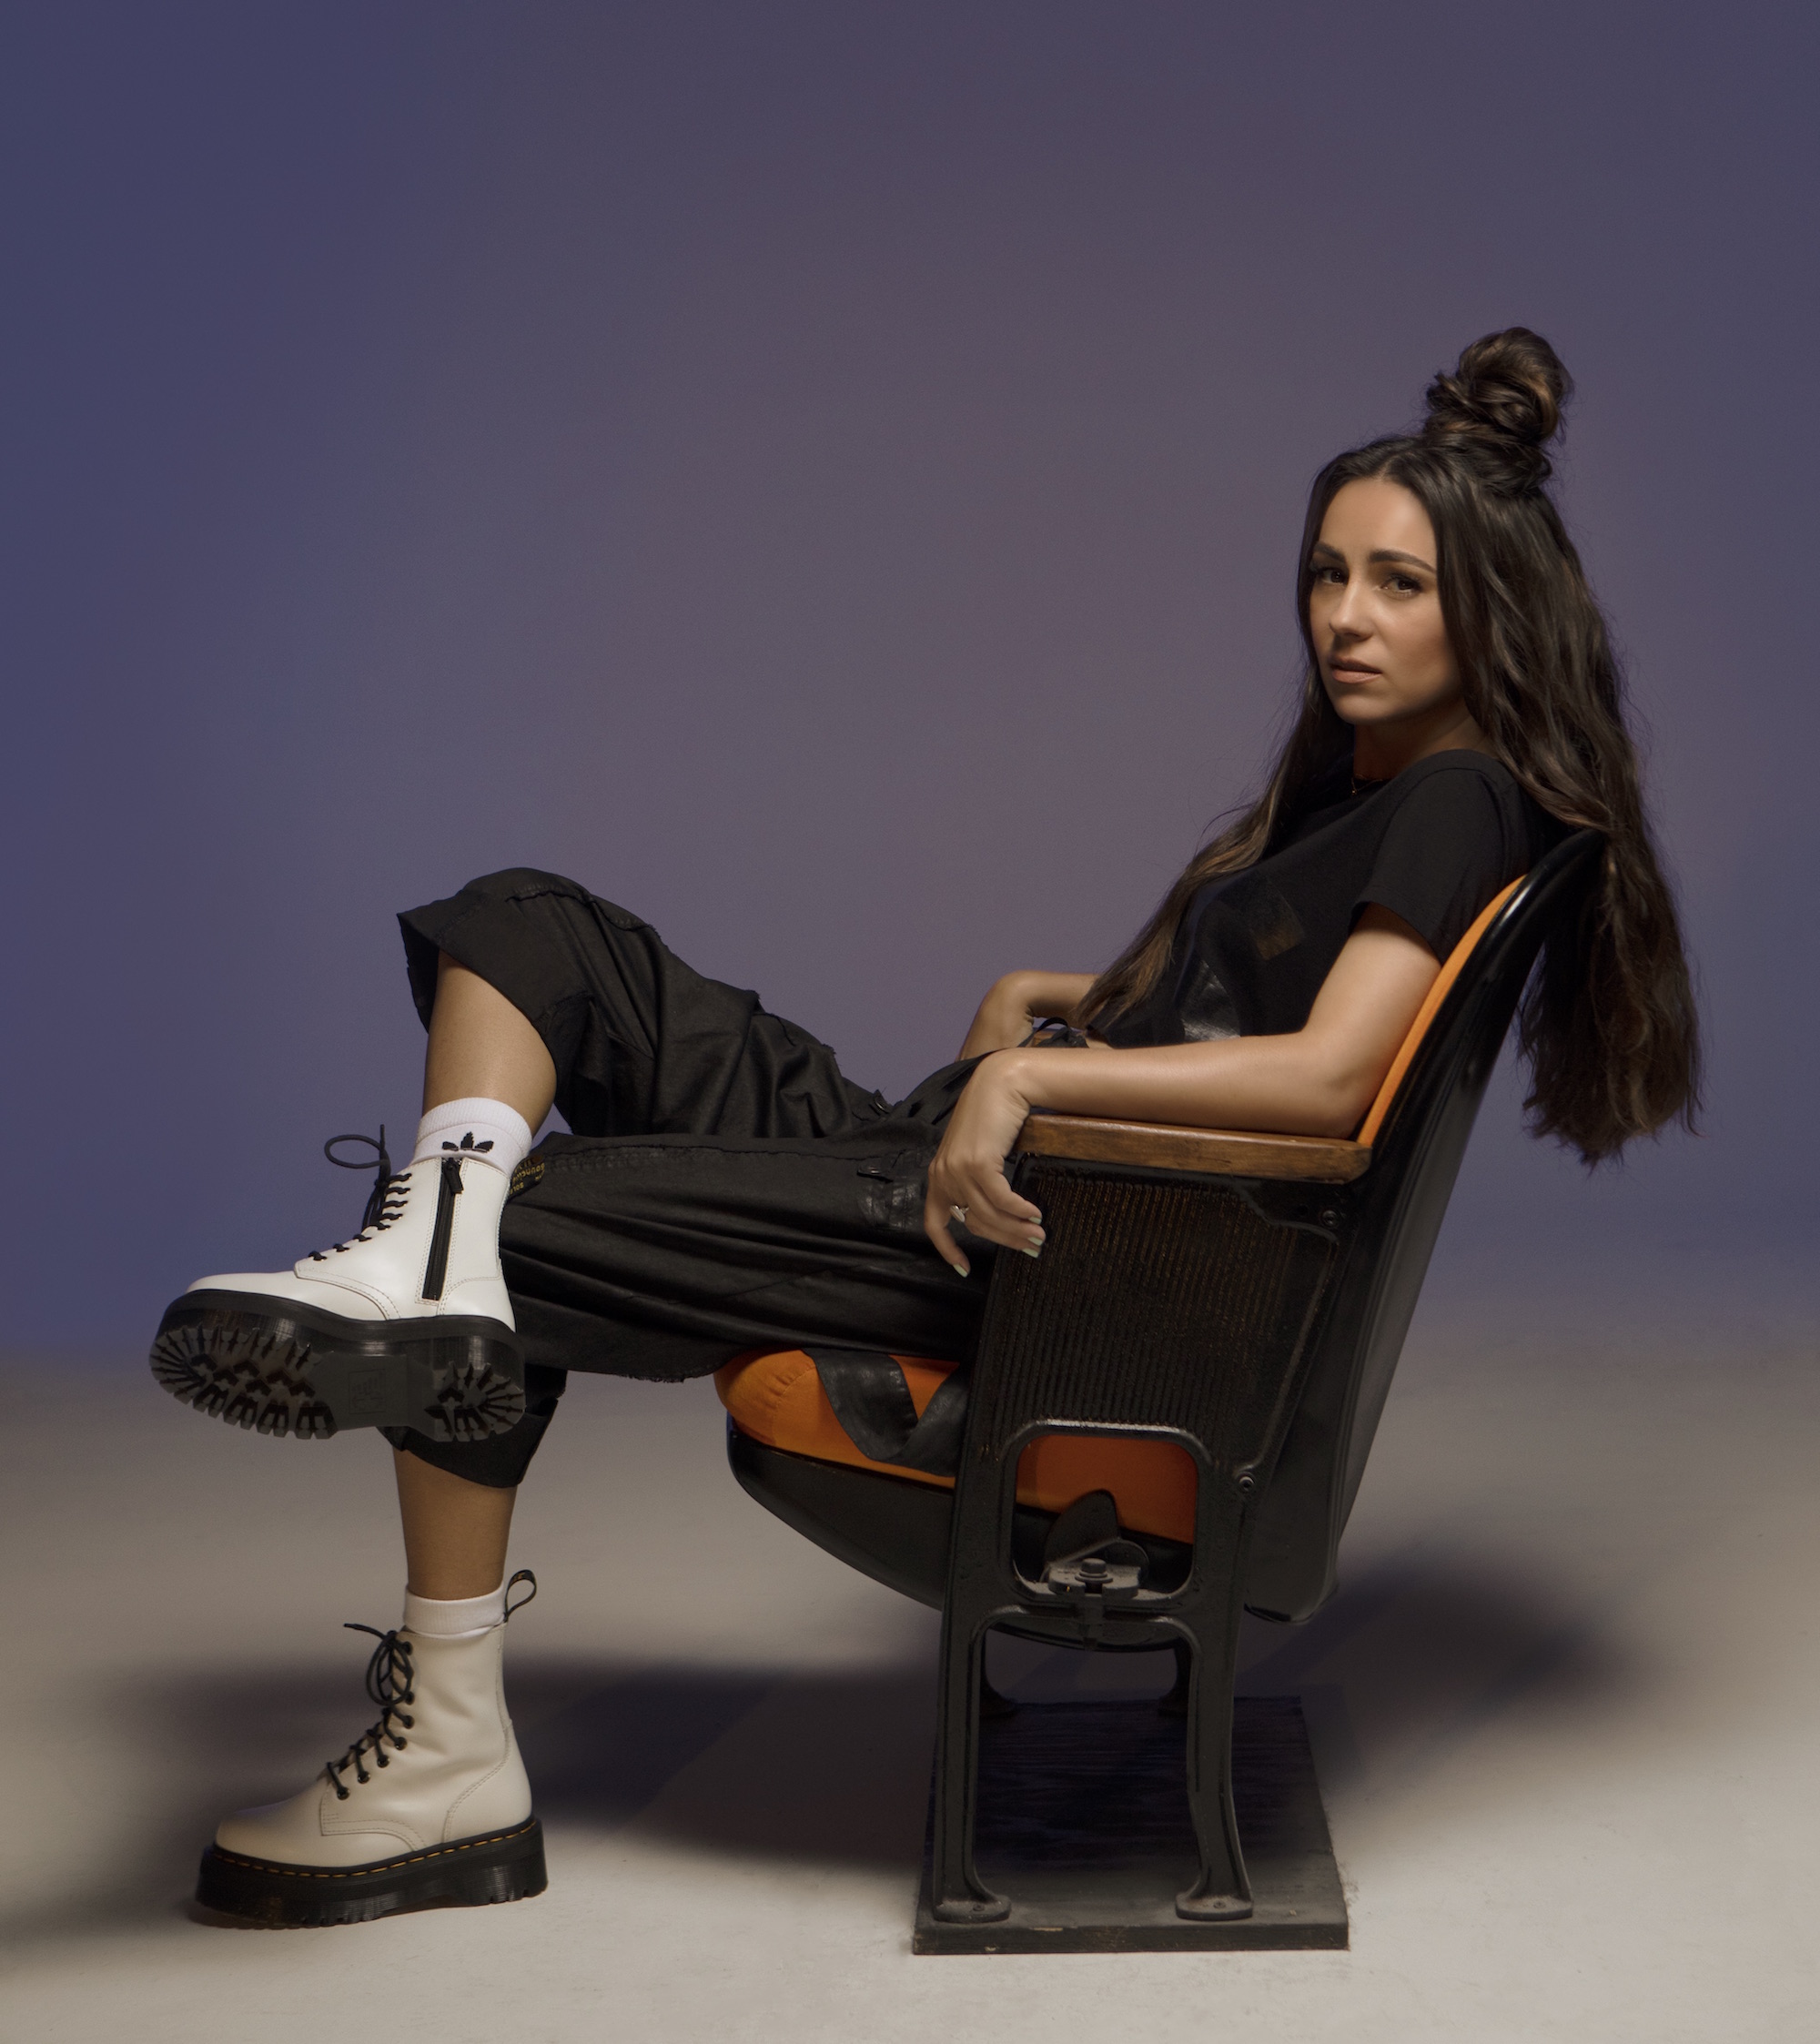 AMY SHARK’S NATIONAL TOUR TO PROCEED IN FULLY SEATED CAPACITY IN JUNE/JULY + NEWCASTLE SHOW ADDED DUE TO FAN DEMAND